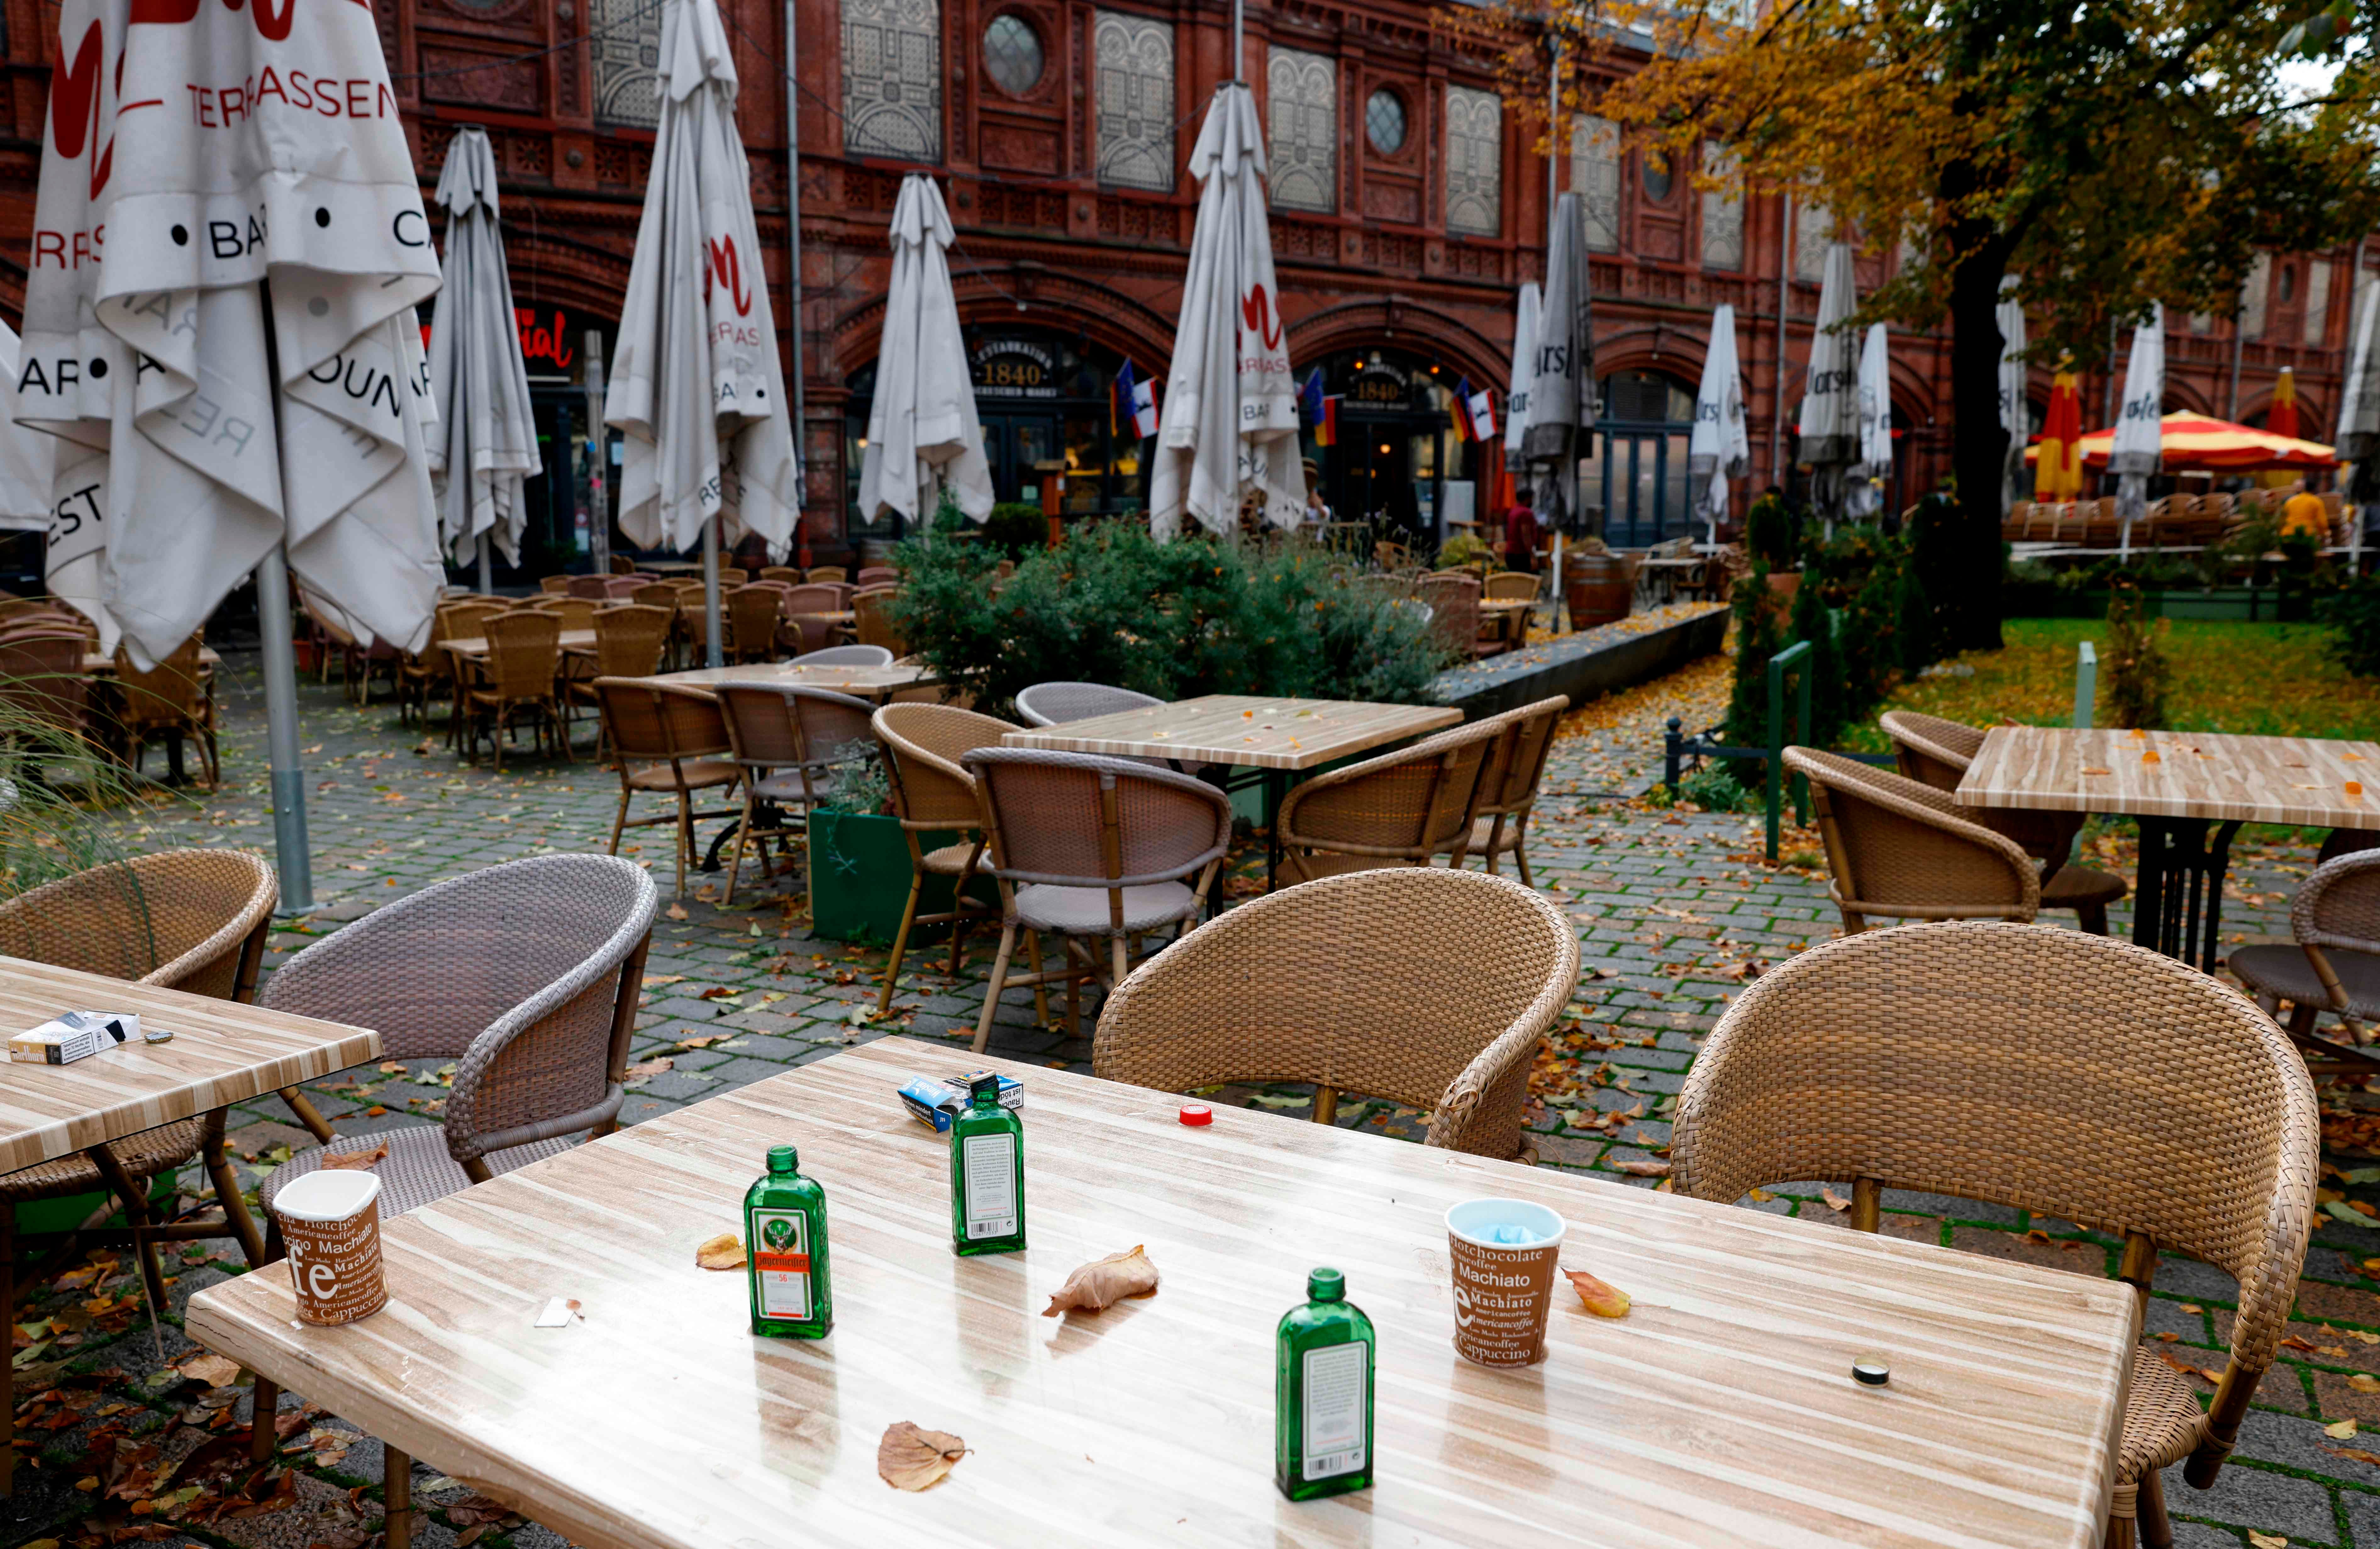 The remains of the last party are seen on the table of a closed cafe at Berlin's Hackescher Markt